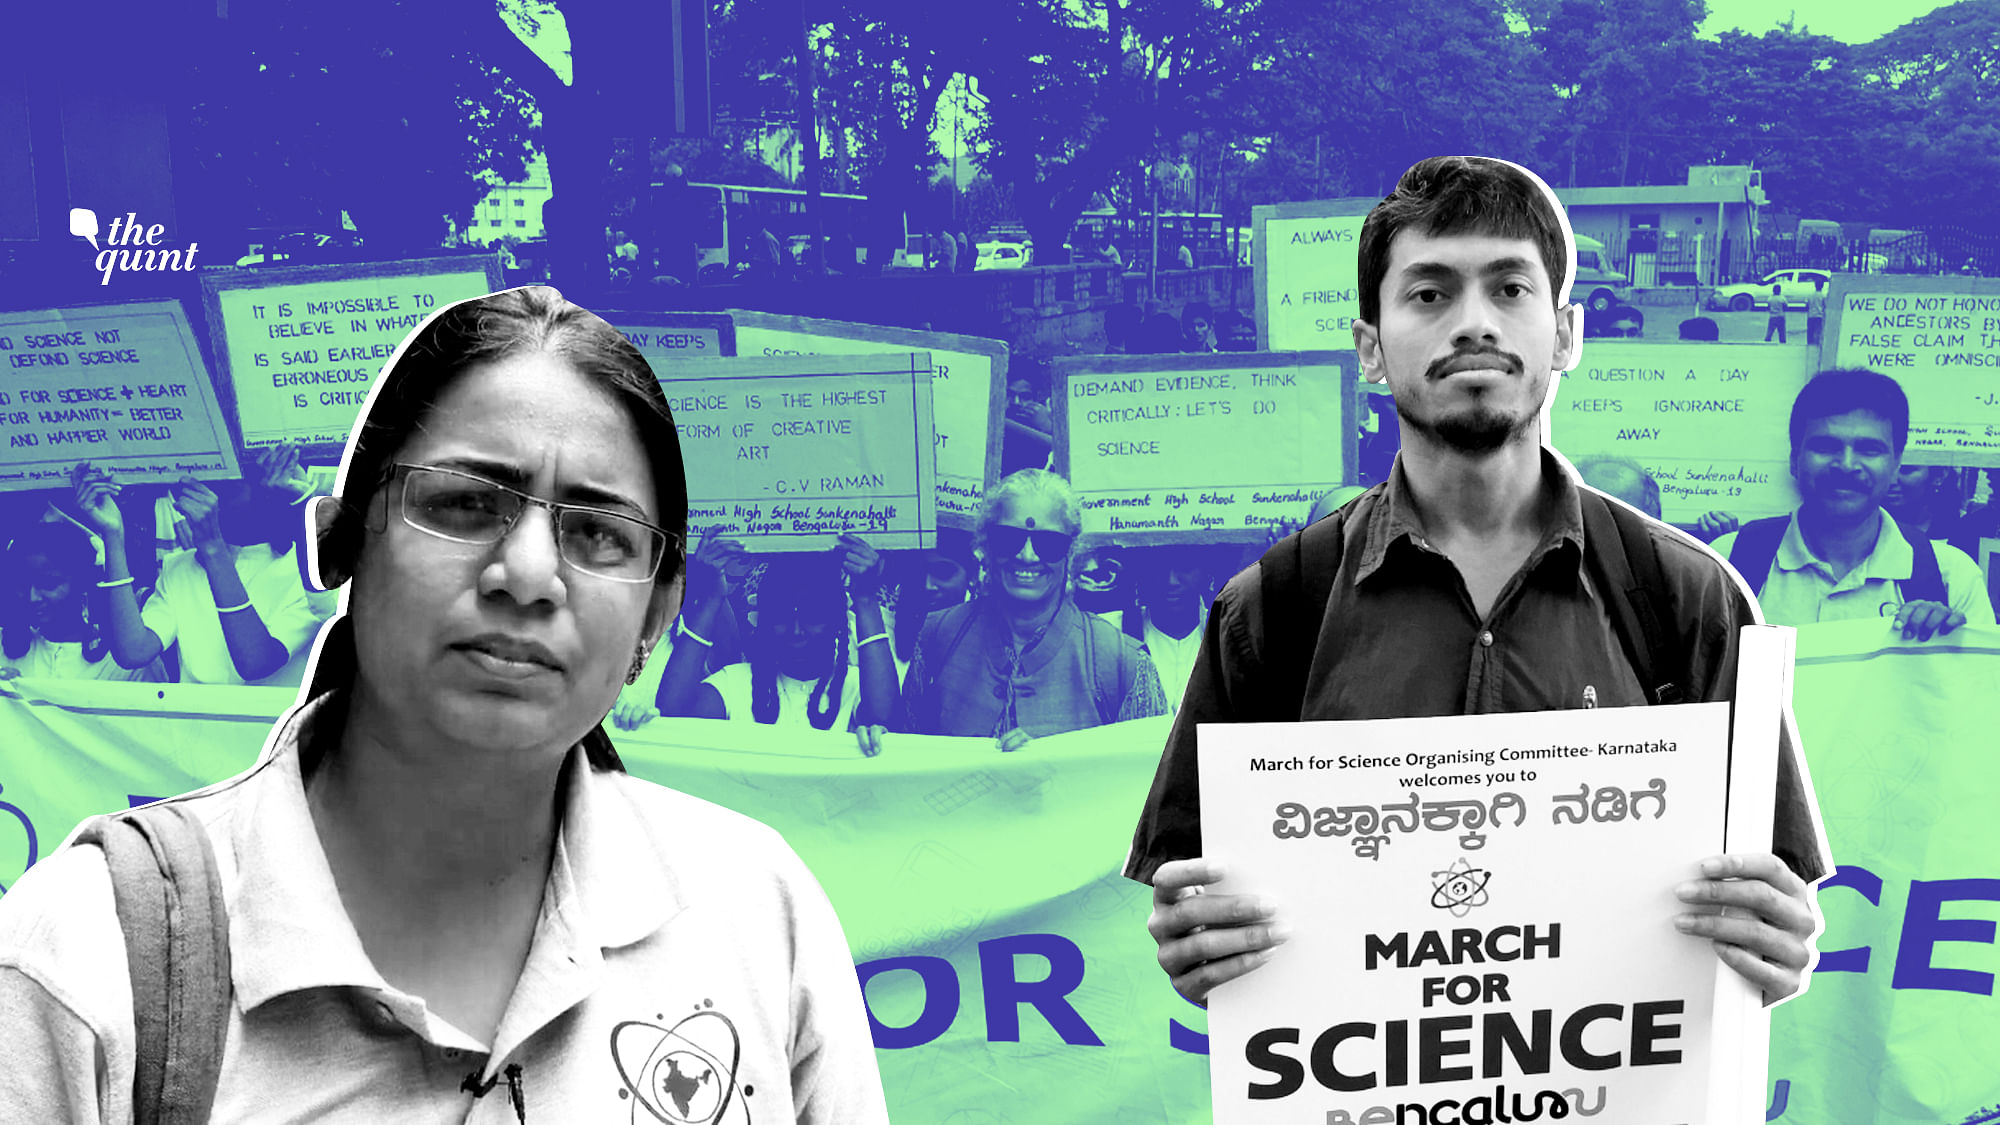 Scientists, scholars and professors from different backgrounds gathered to March for Science in Bengaluru on 10 August 2019.